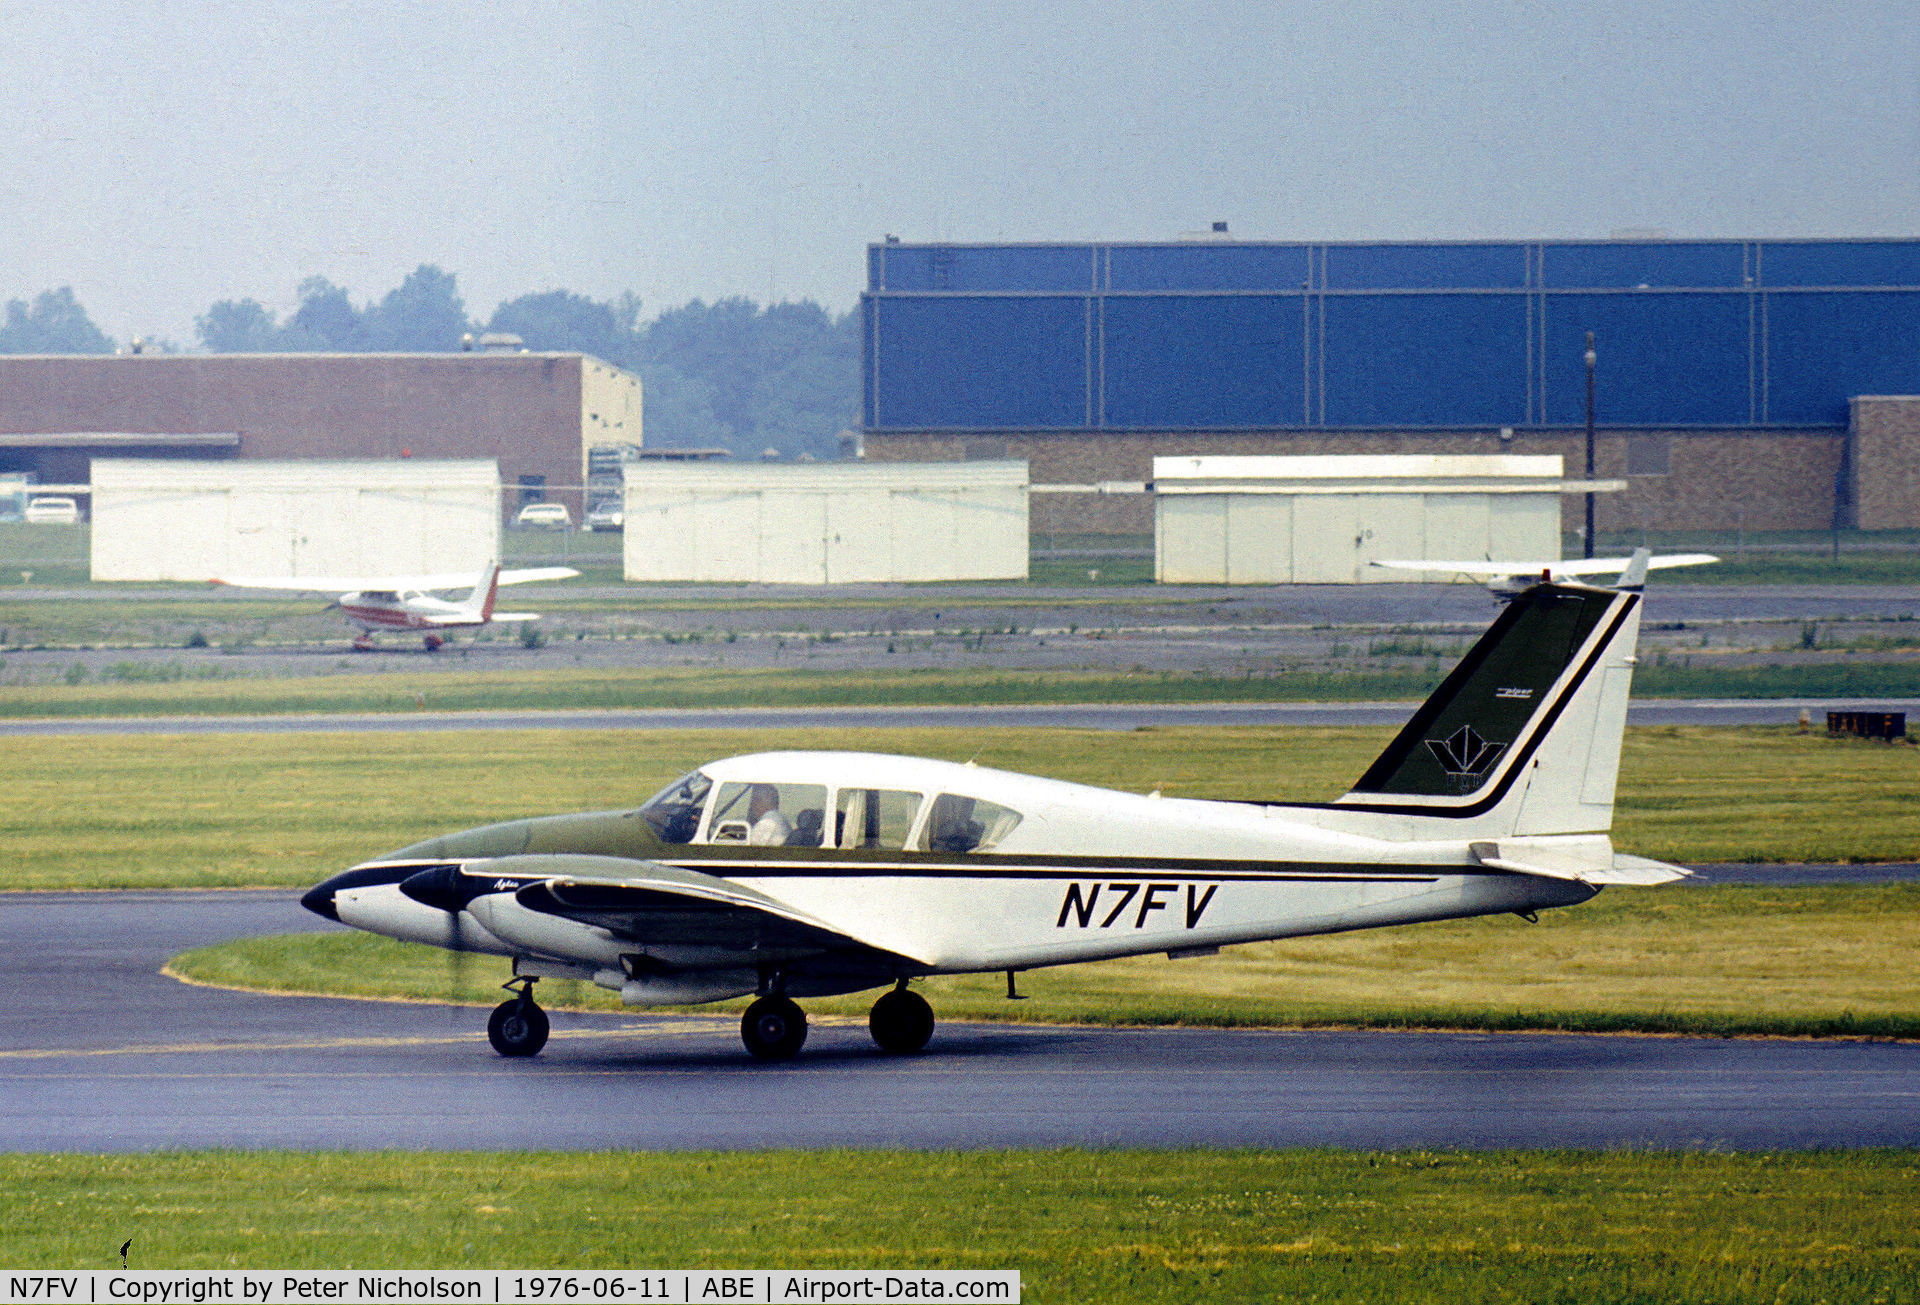 N7FV, Piper PA-23-250 Aztec C/N not known, P-23-250 Aztec as seen at Allentown in the Summer of 1976.